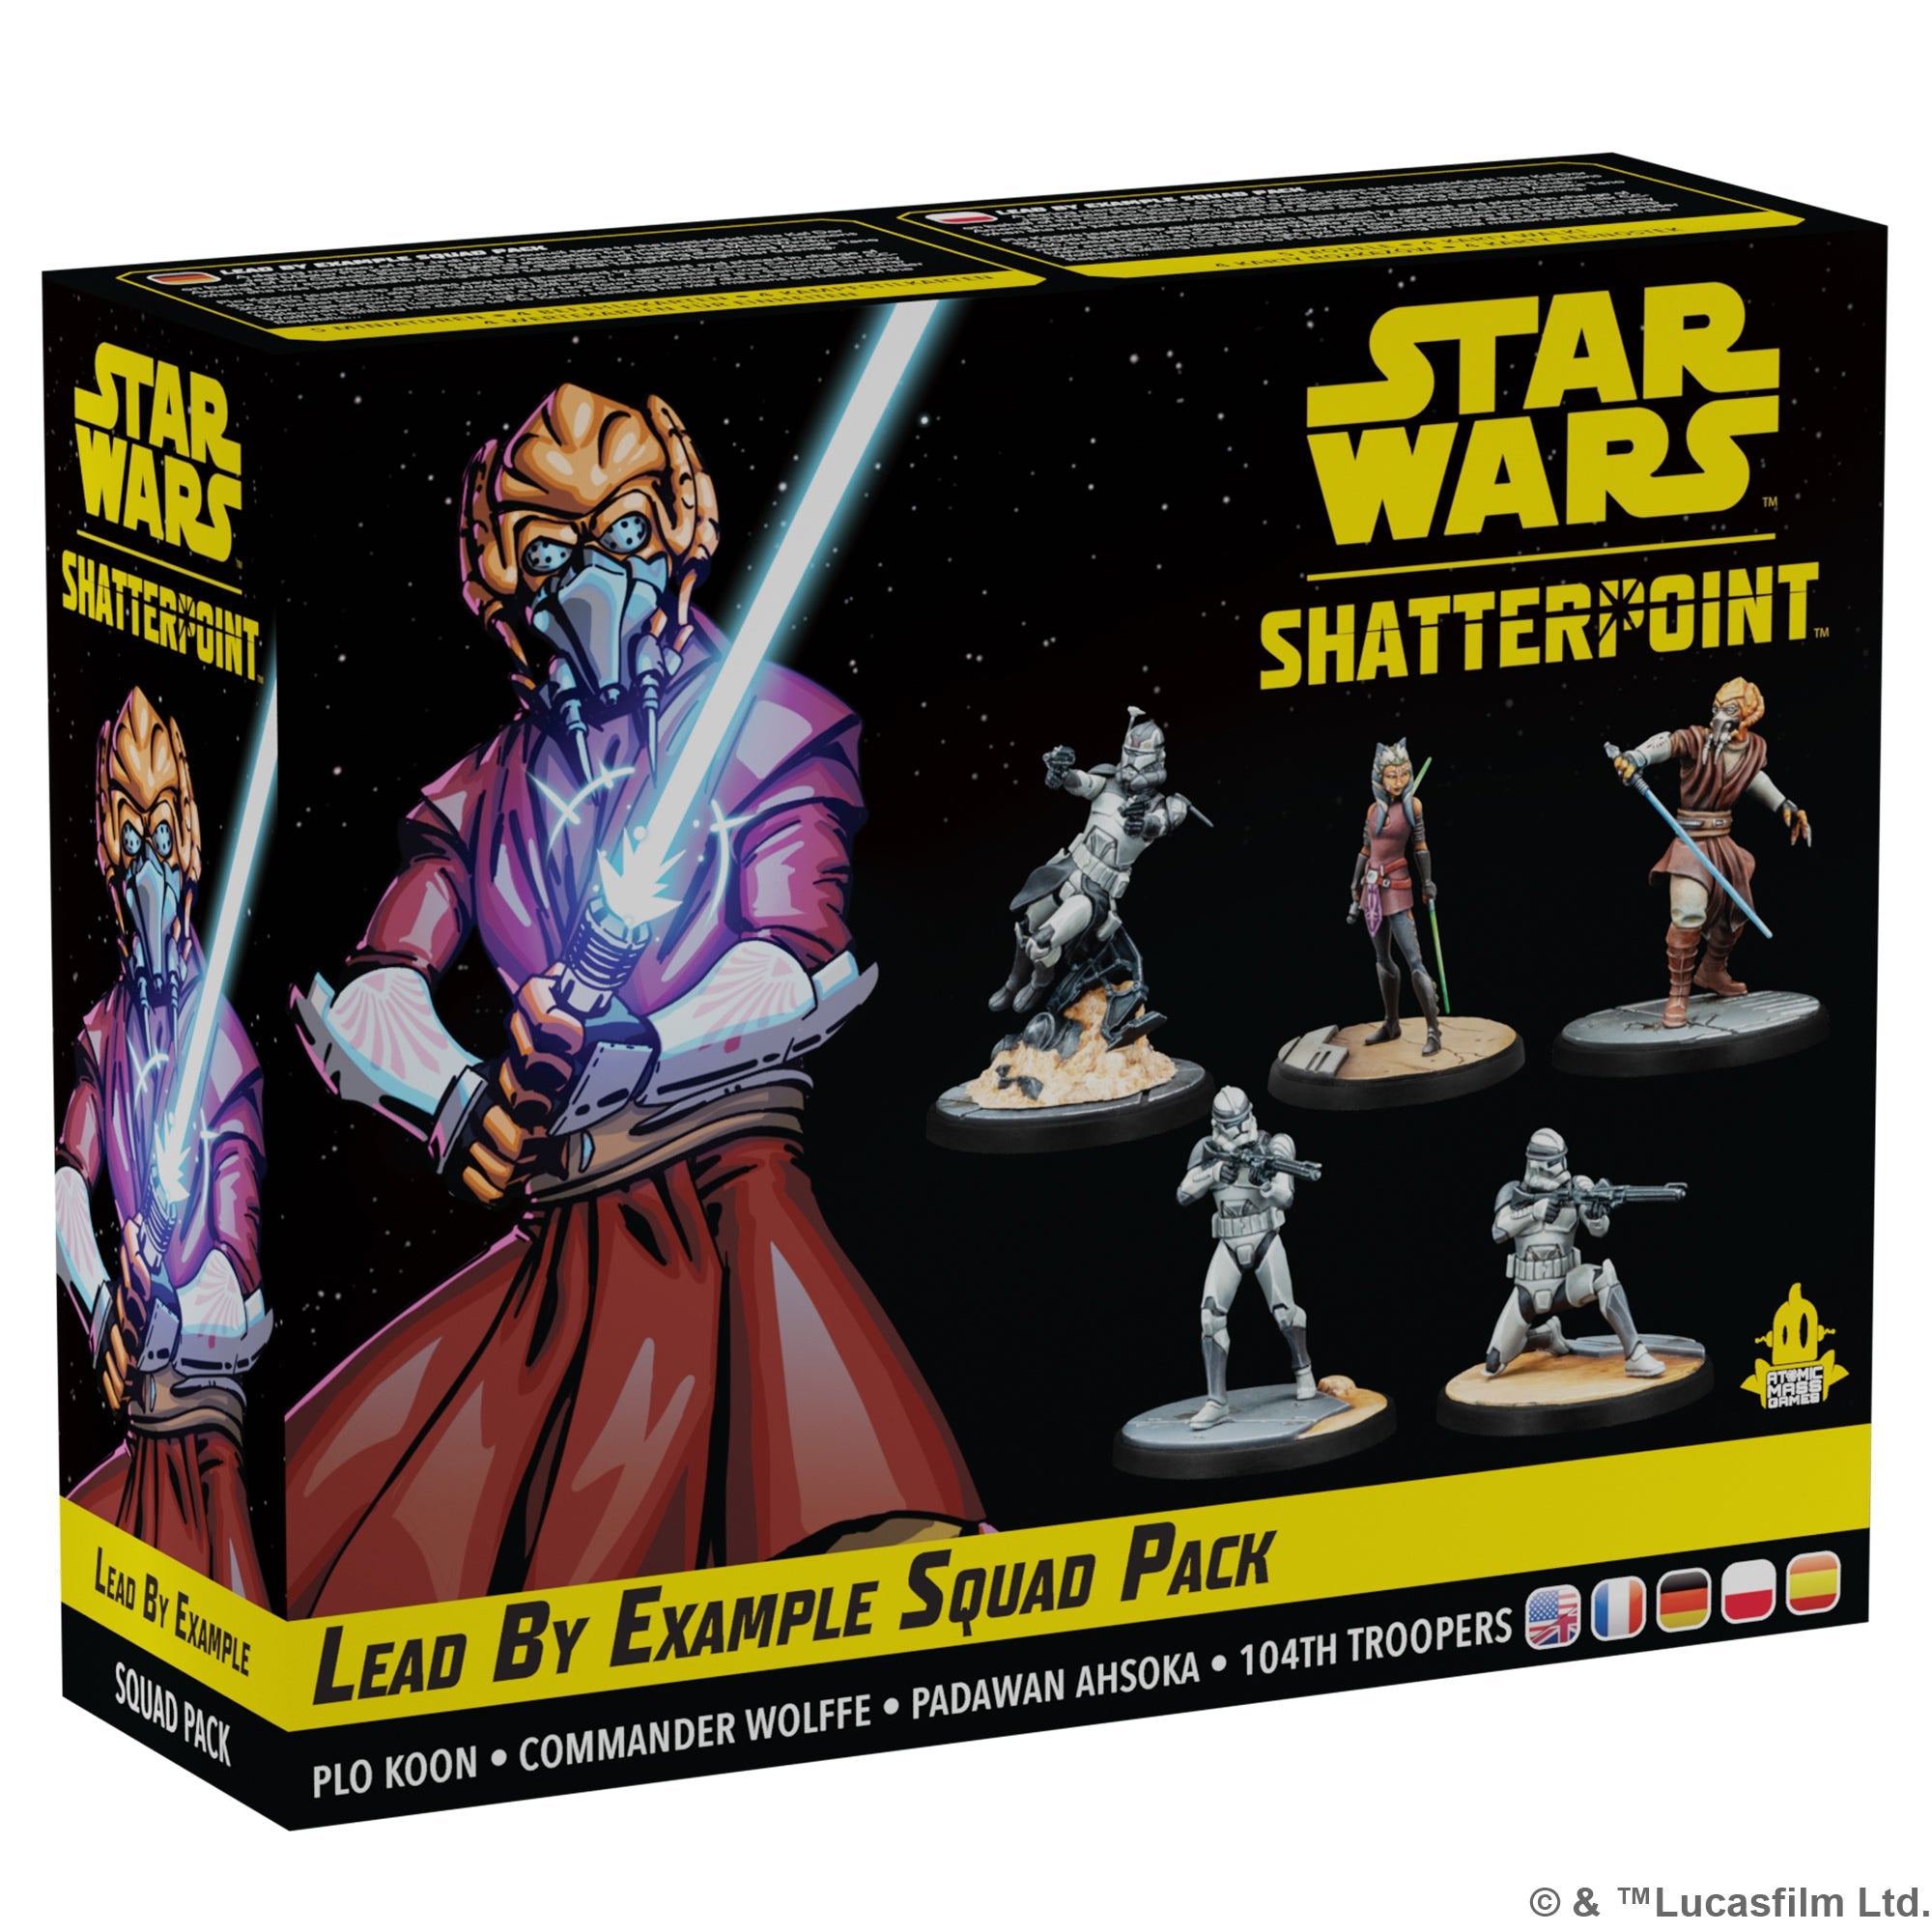 STAR WARS SHATTERPOINT: LEAD BY EXAMPLE - PLO KOON SQUAD PACK | BD Cosmos